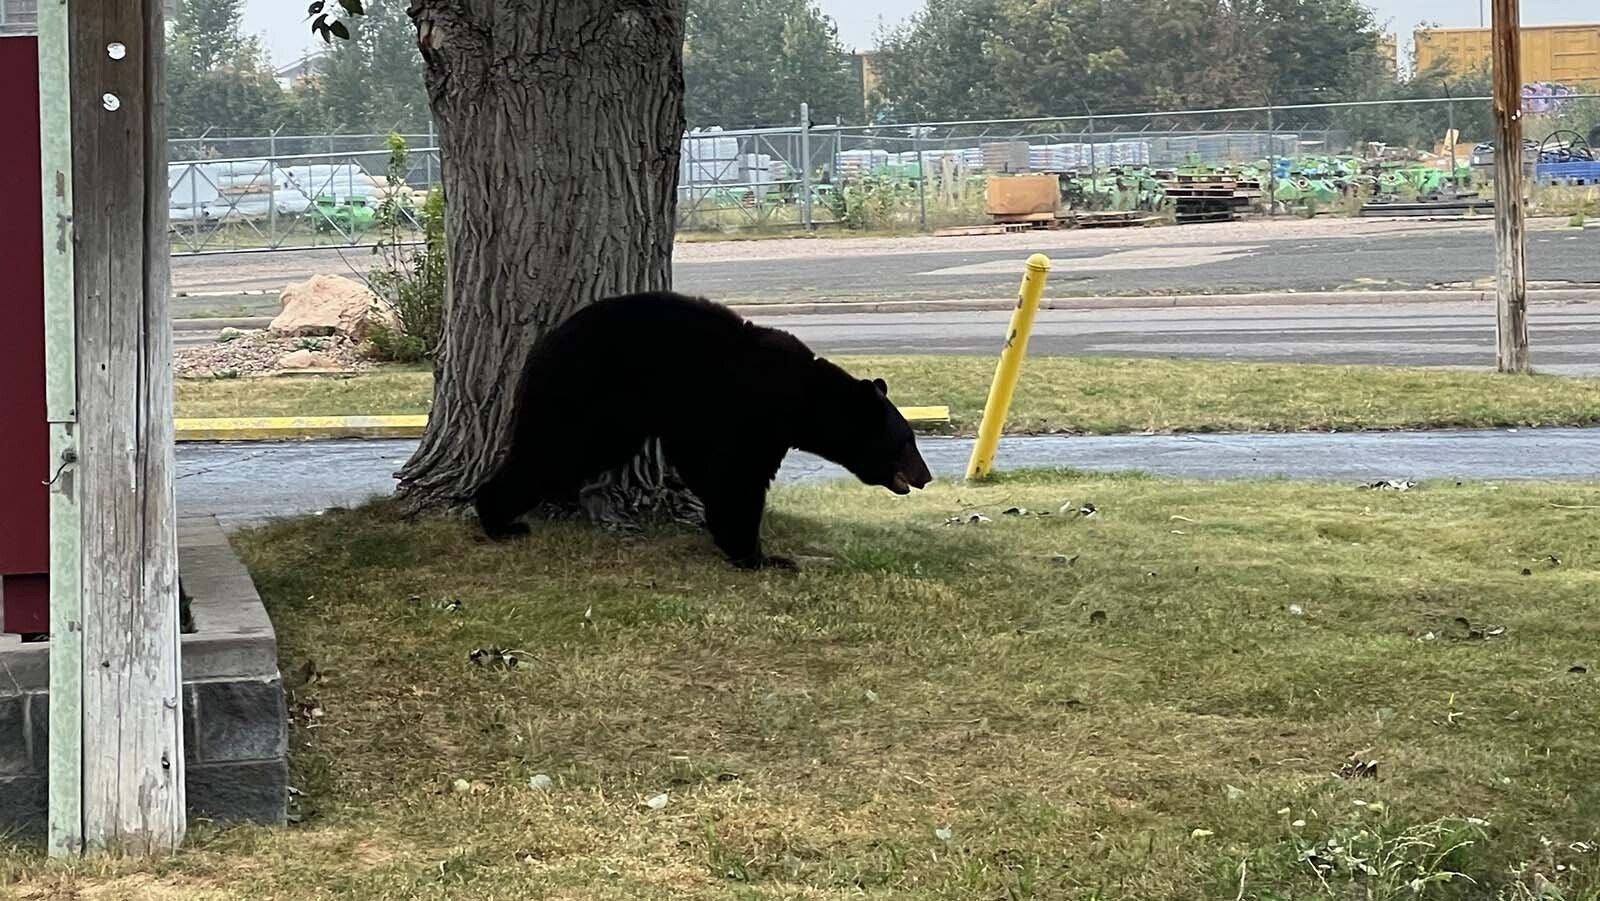 This black bear, reported to have an injured paw, was captured alive in Cheyenne’s Clear Creek Park. Its injuries were deemed minor, and it was set free in the Snowy Range Mountains.